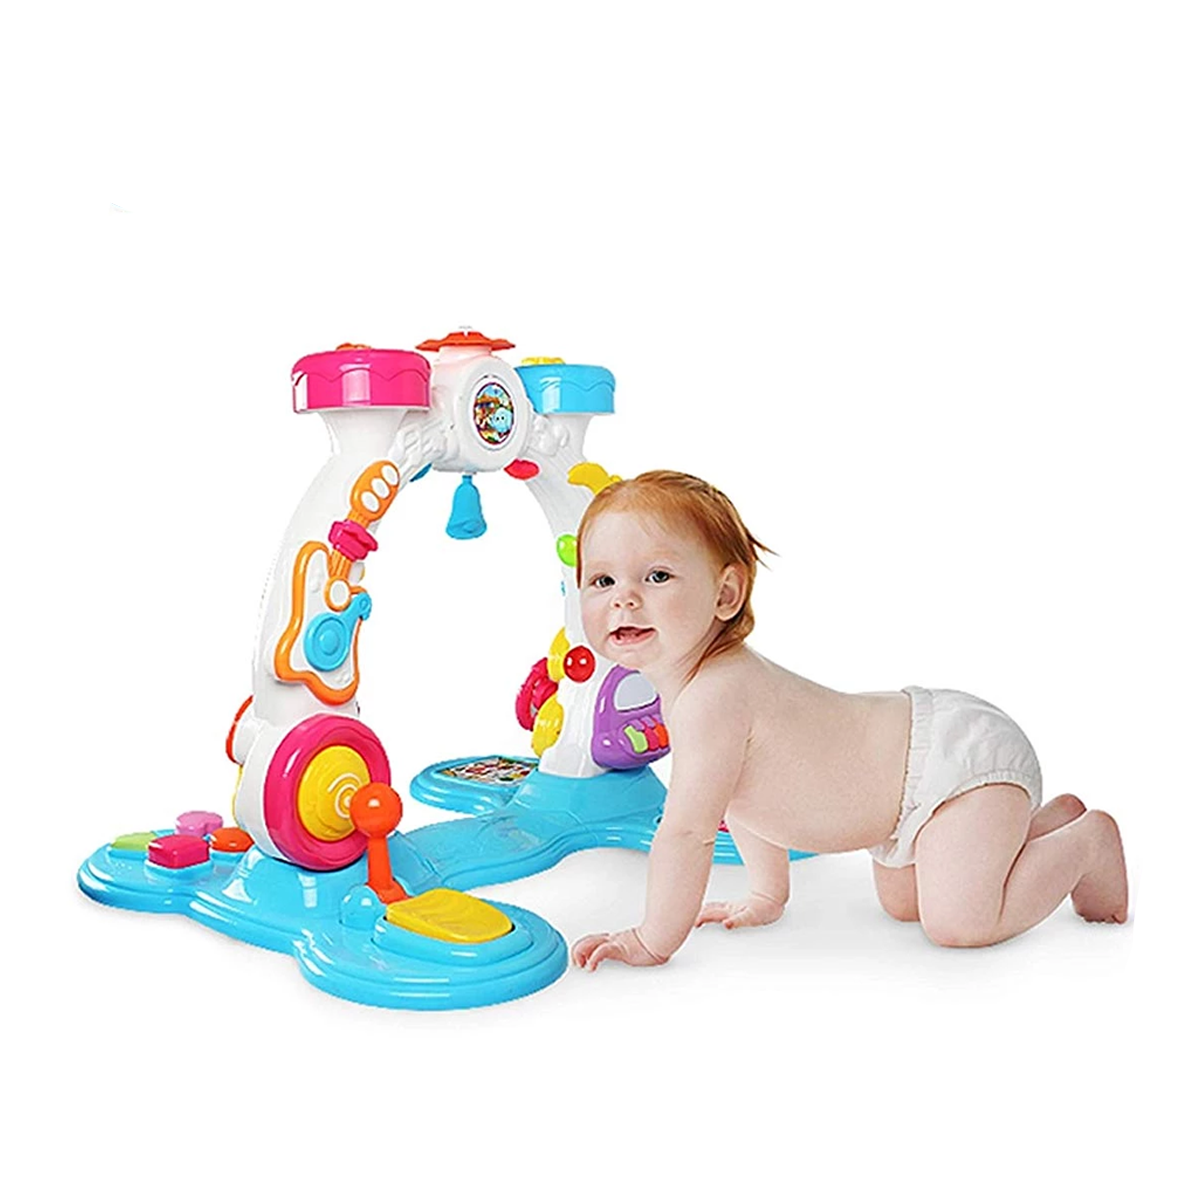 Baoli Baby Gym Early Toy Creative Design Color Block Toy